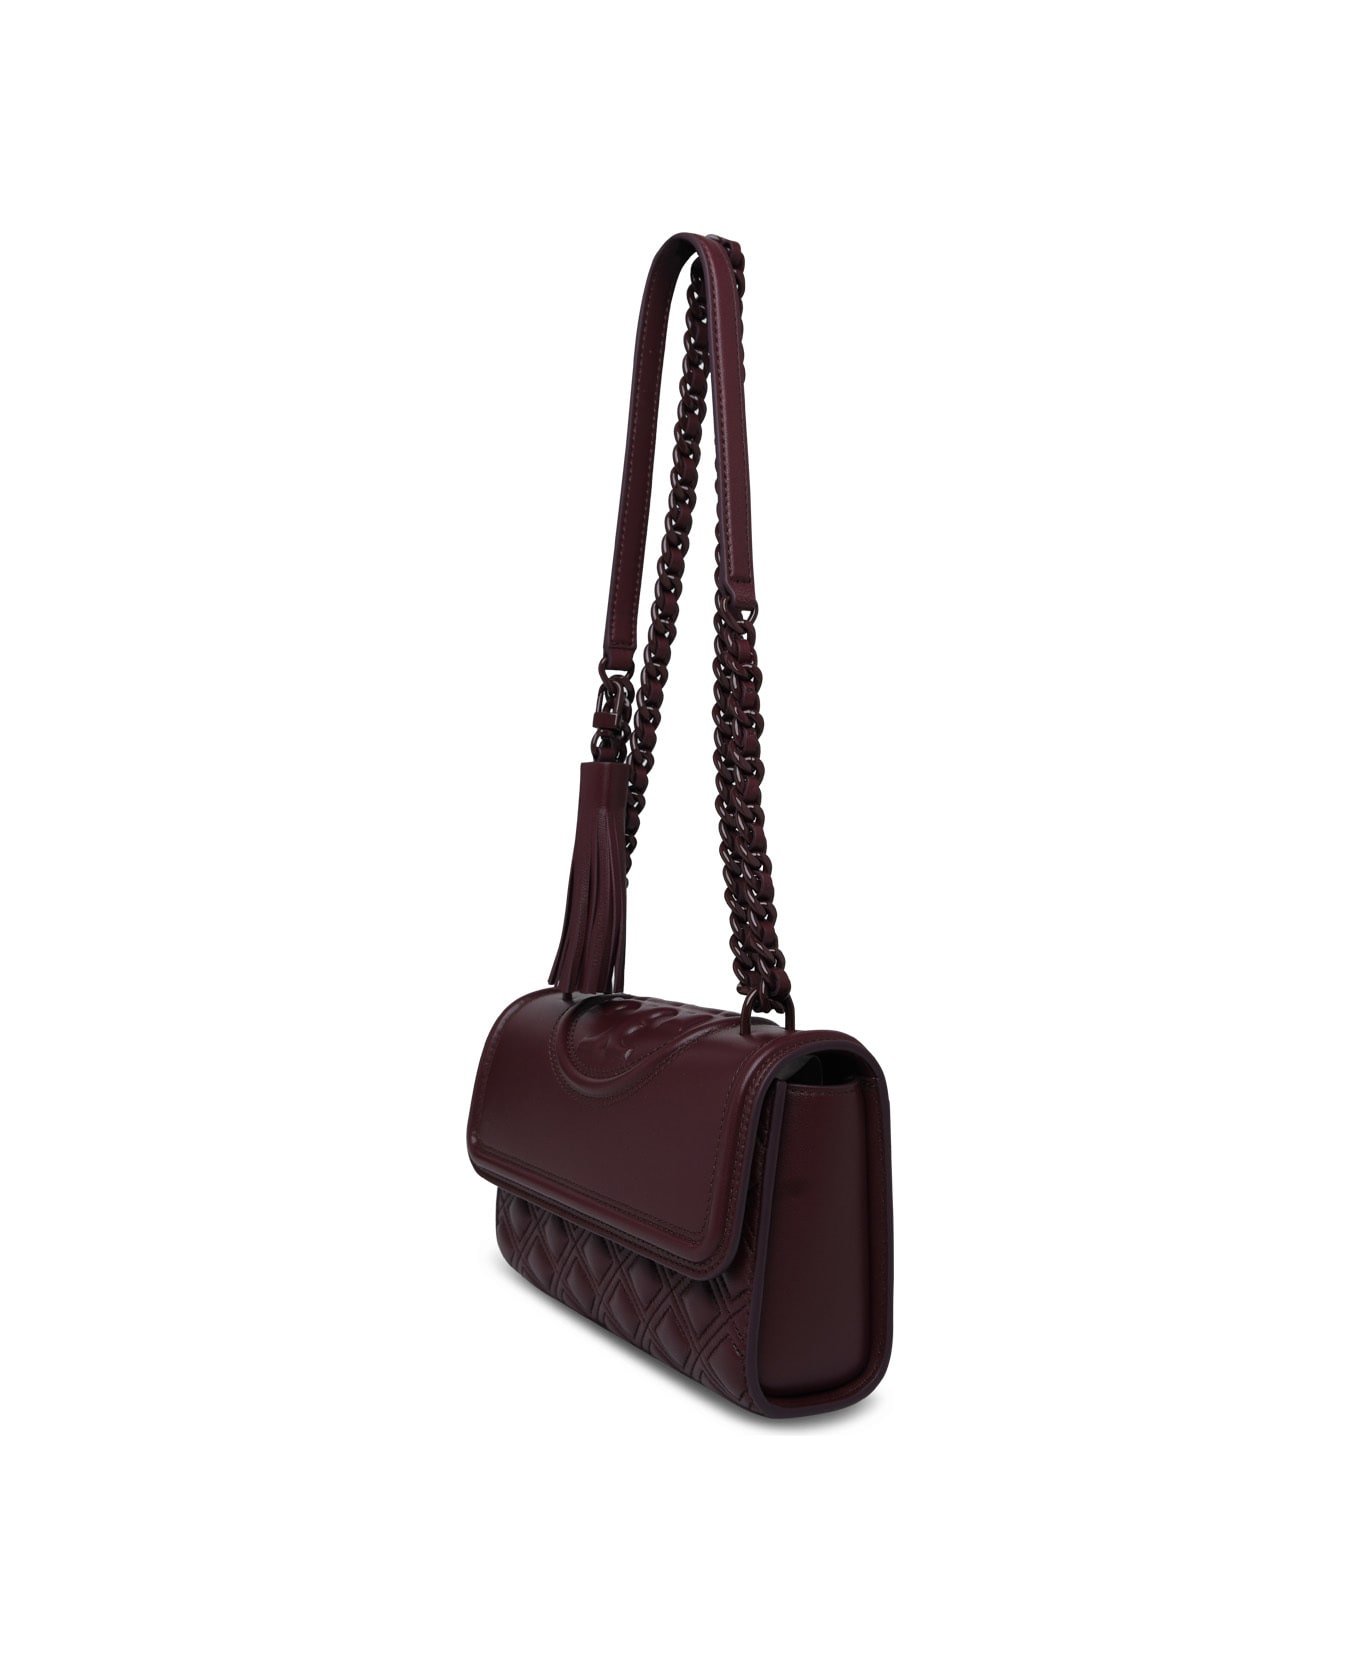 Tory Burch Fleming Leather Shoulder Bag - MUSCADINE